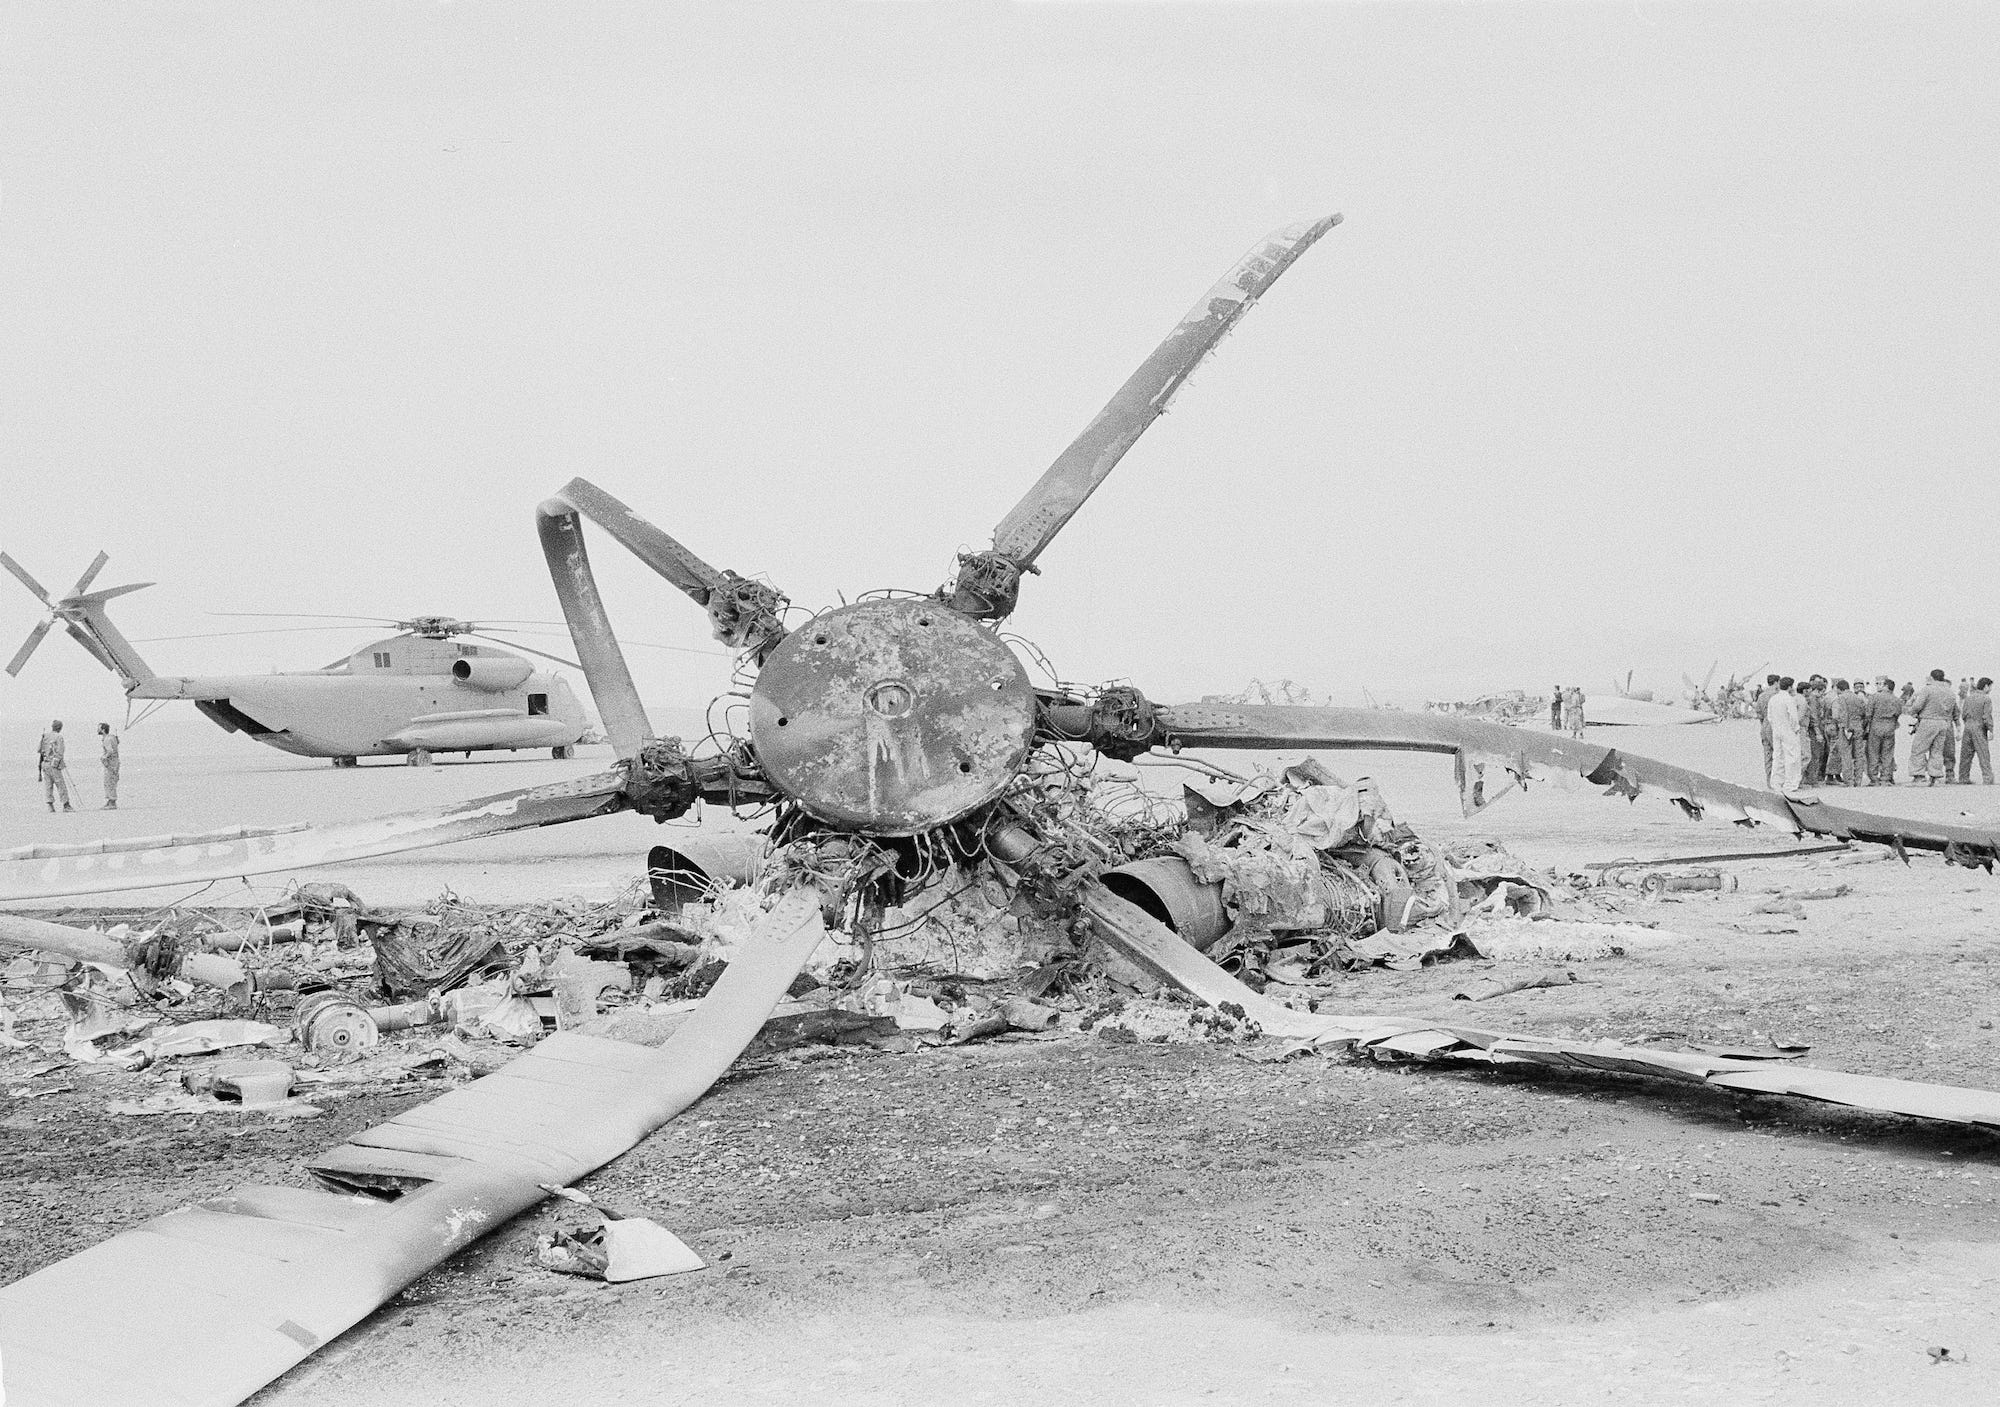 Destroyed US helicopters after Operation Eagle Claw in Iran